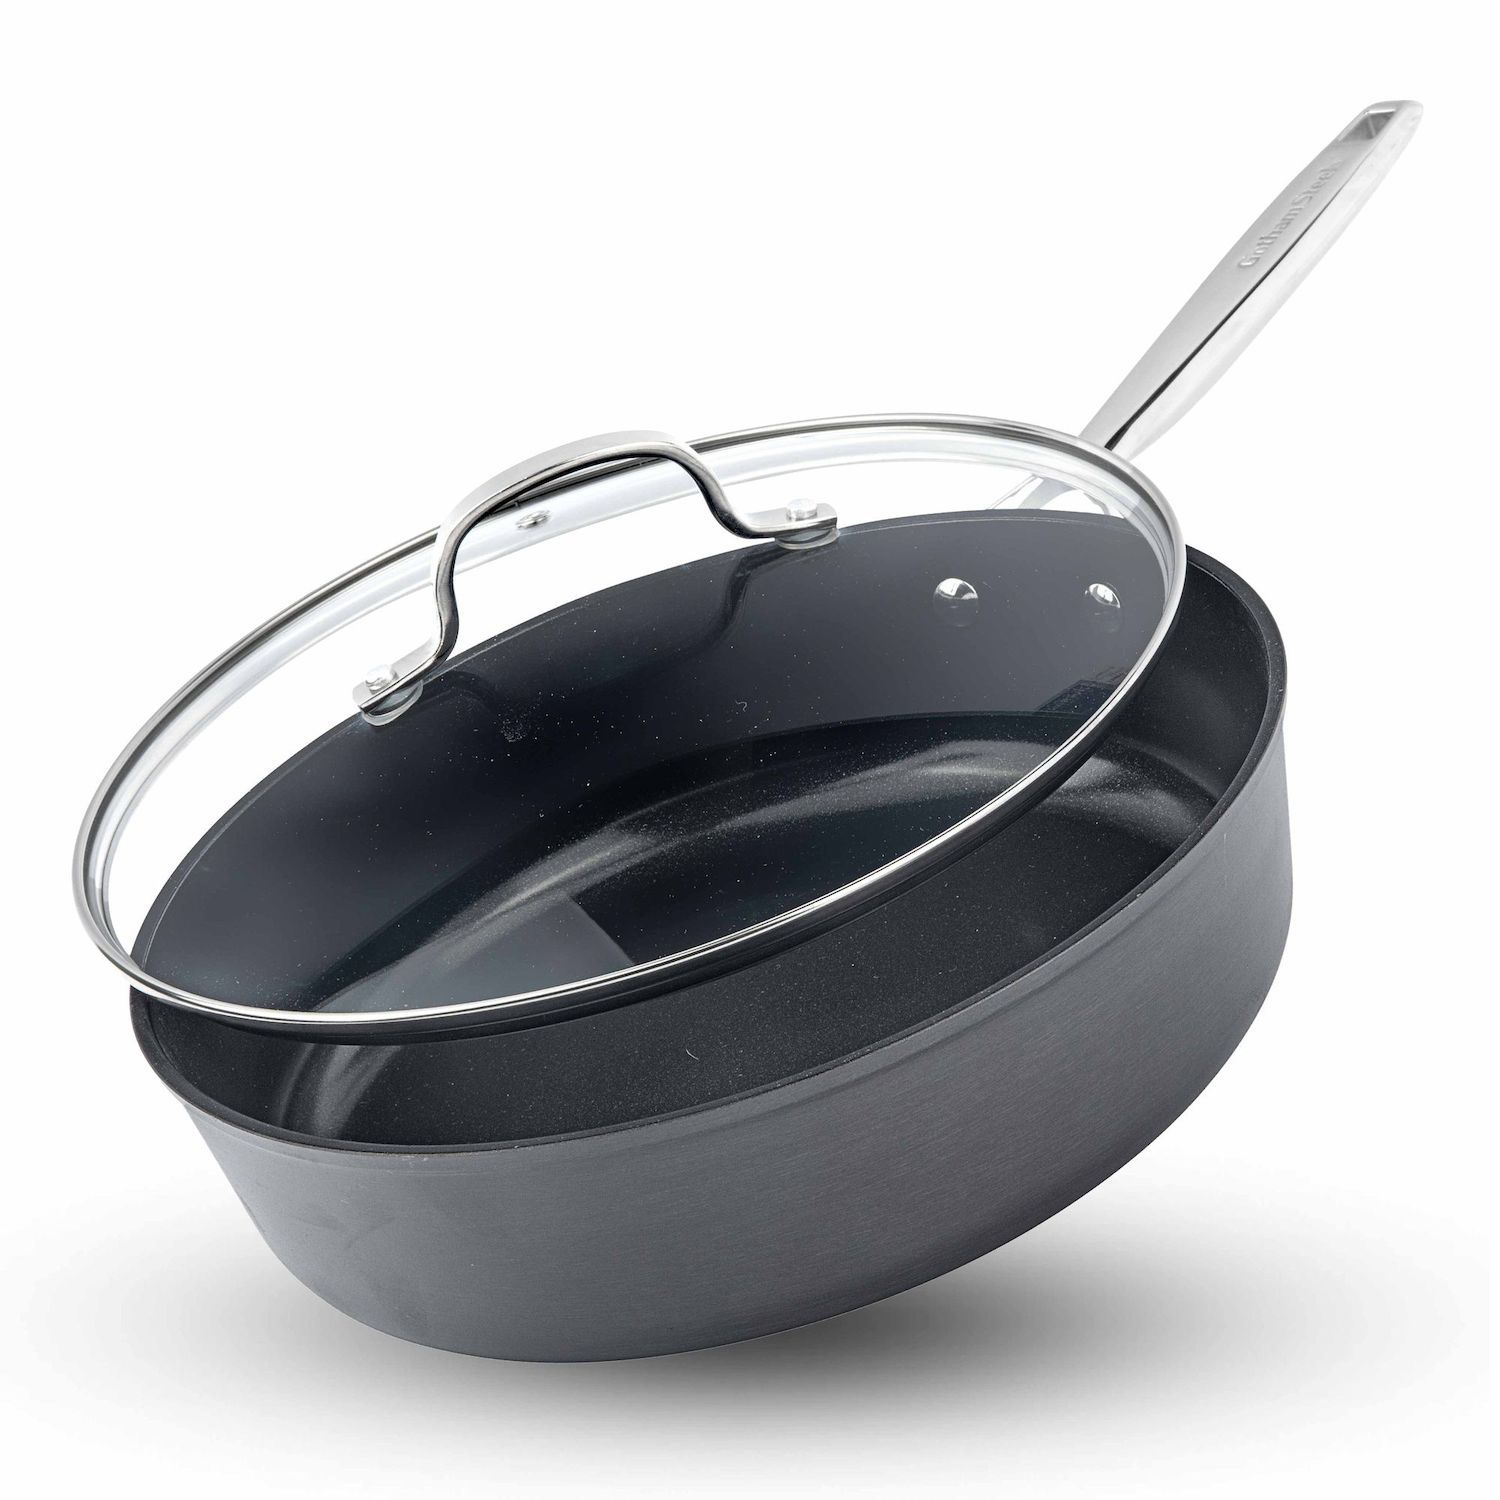 Tramontina Covered Sauce Pan Hard Anodized 4 Qt